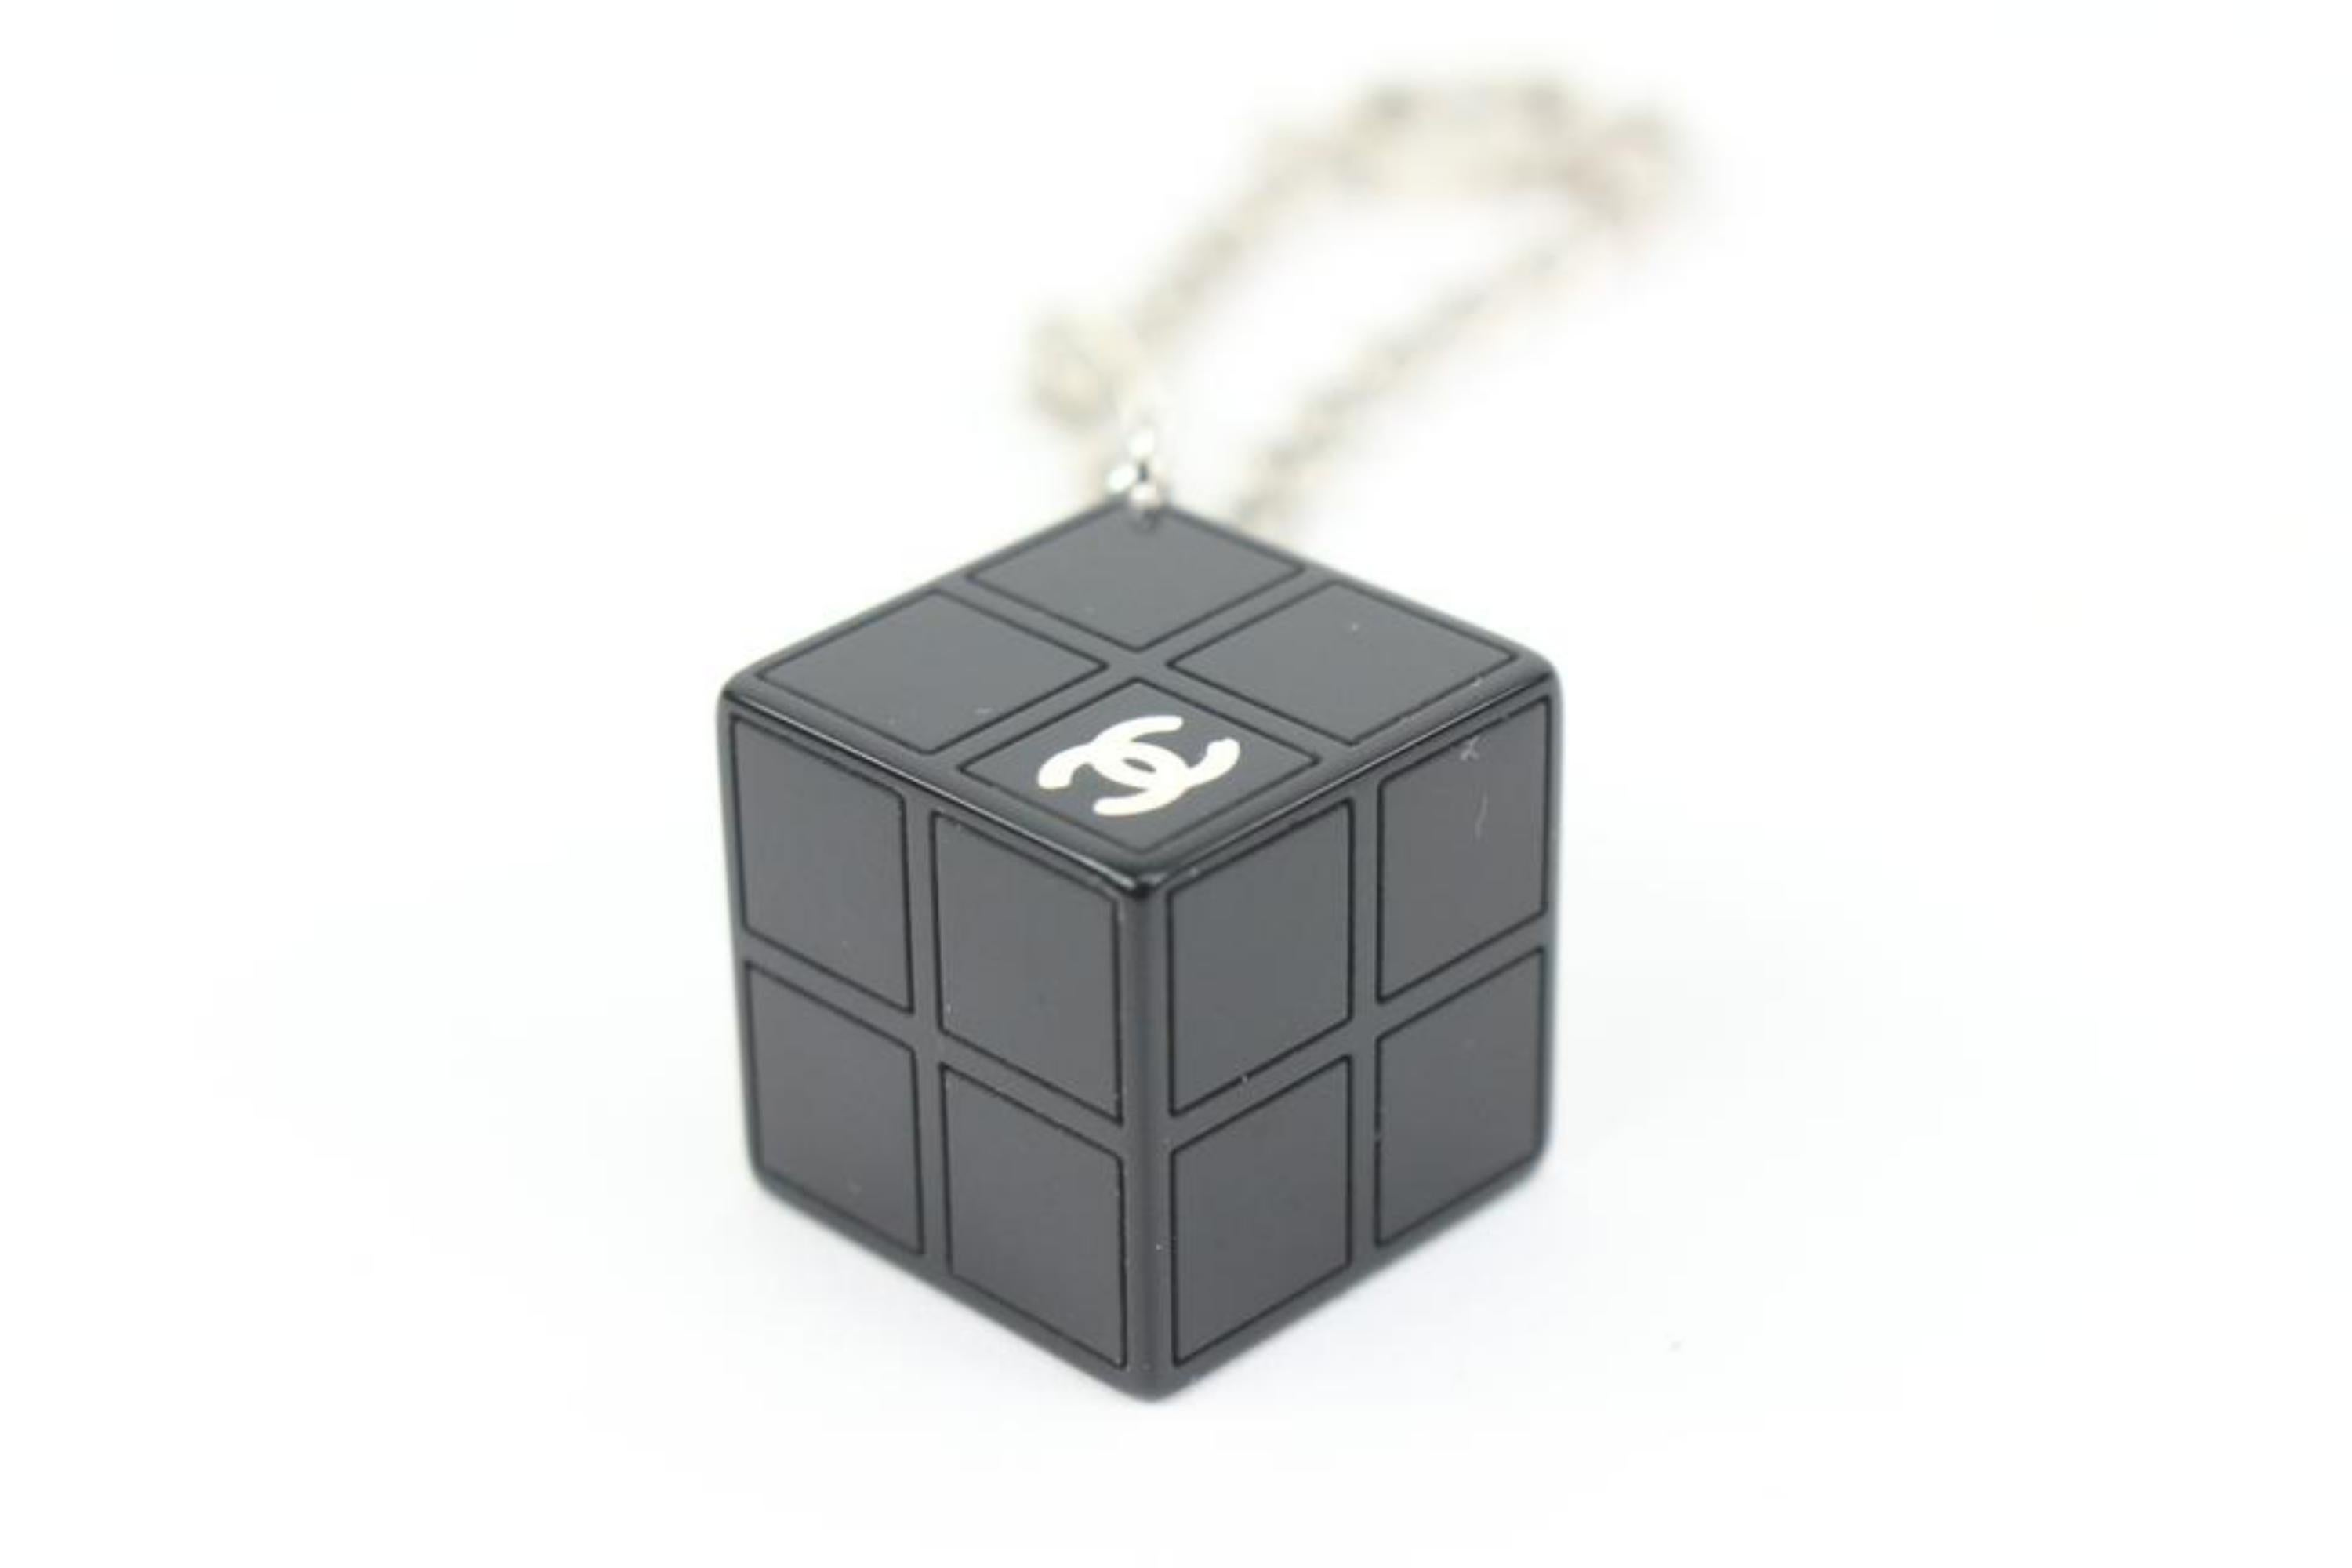 Chanel 04s Black x Silver CC Logo Cube Block Bracelet 16ck311s
Date Code/Serial Number: 04 S
Made In: Italy
Measurements: Length:  7.5